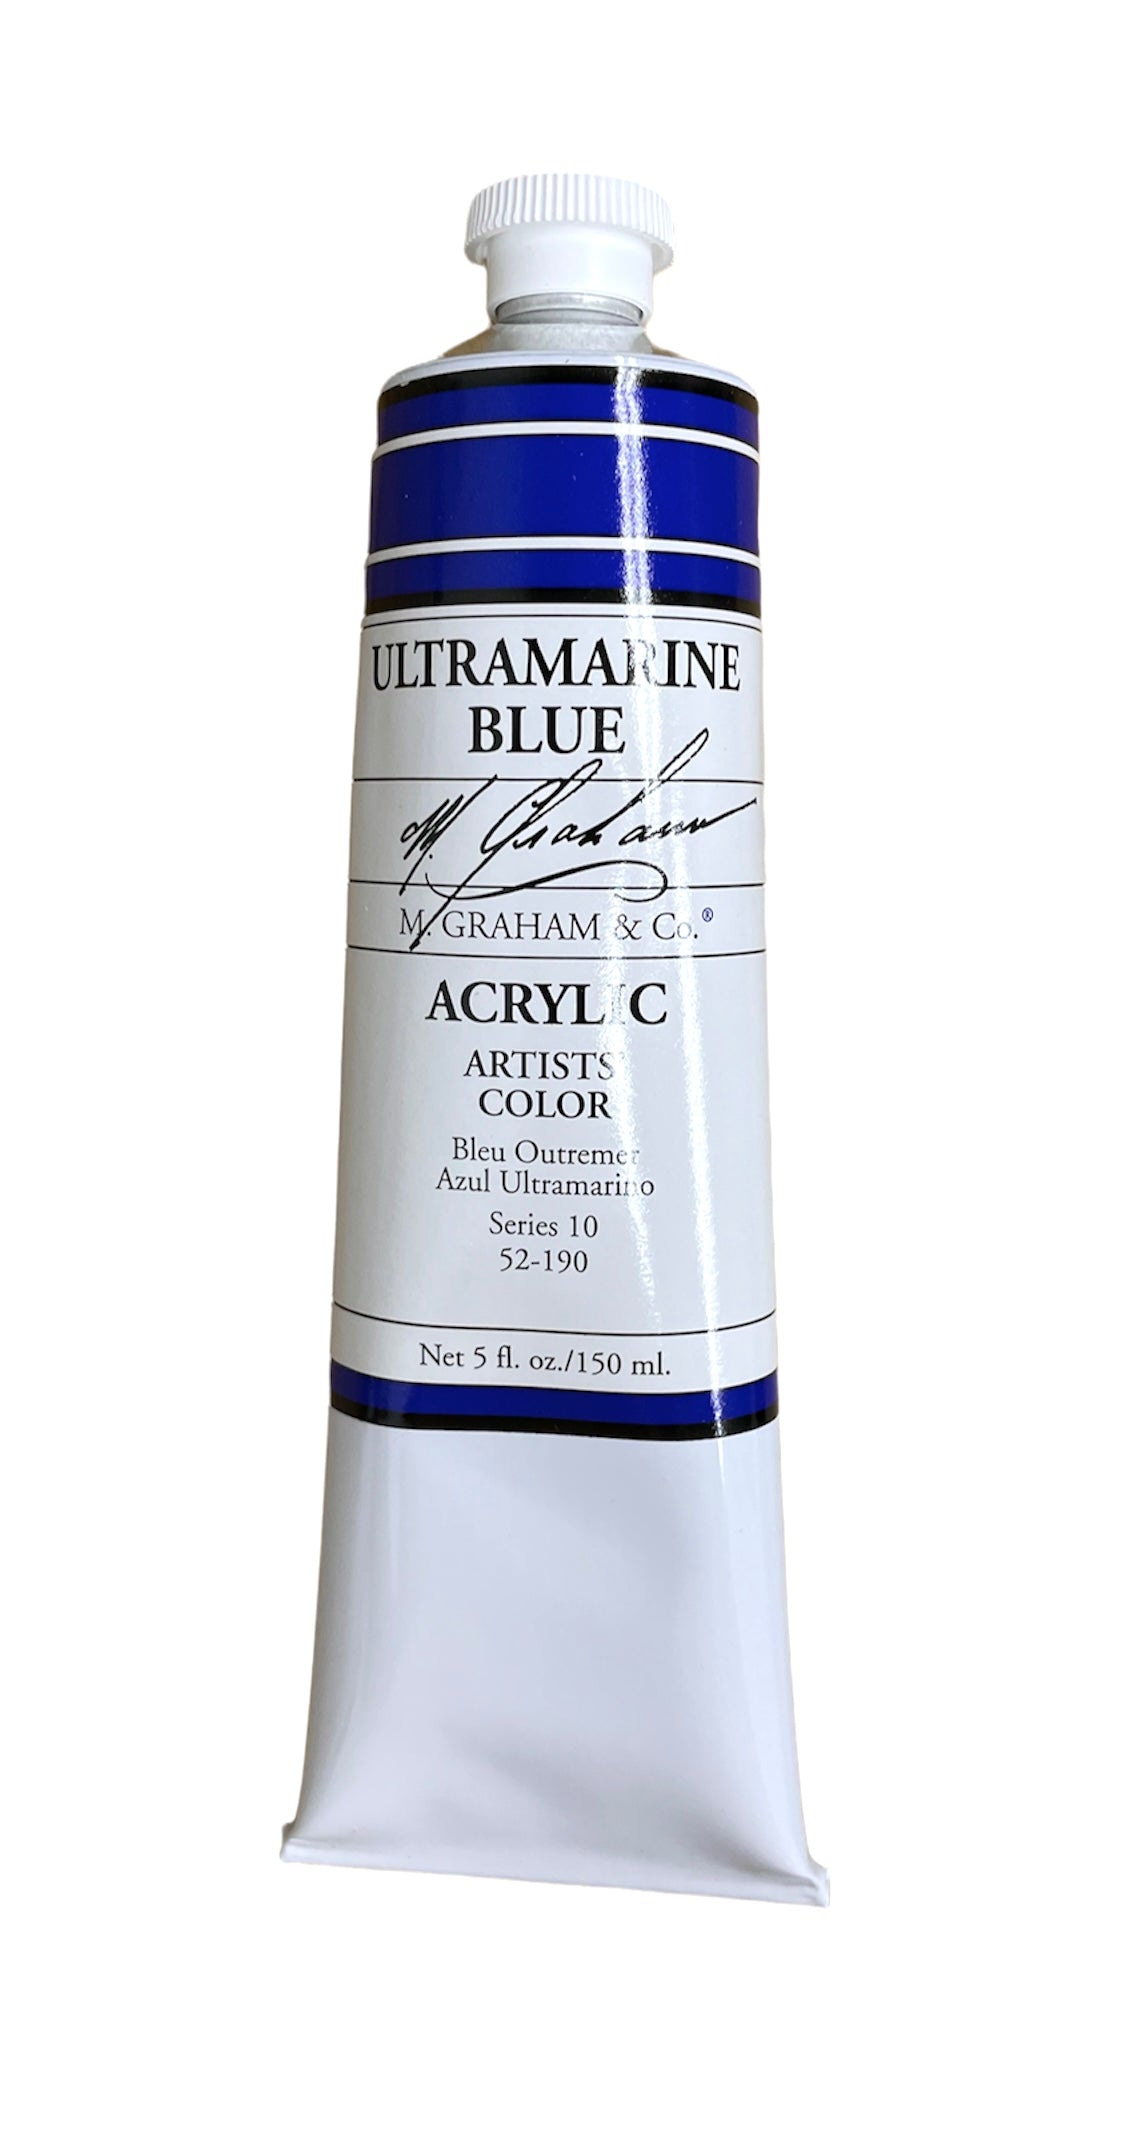 M. Graham Arcylic Ultramarine Blue in 150ml. Available in Drawing Etc. Art Supplies store, Singapore